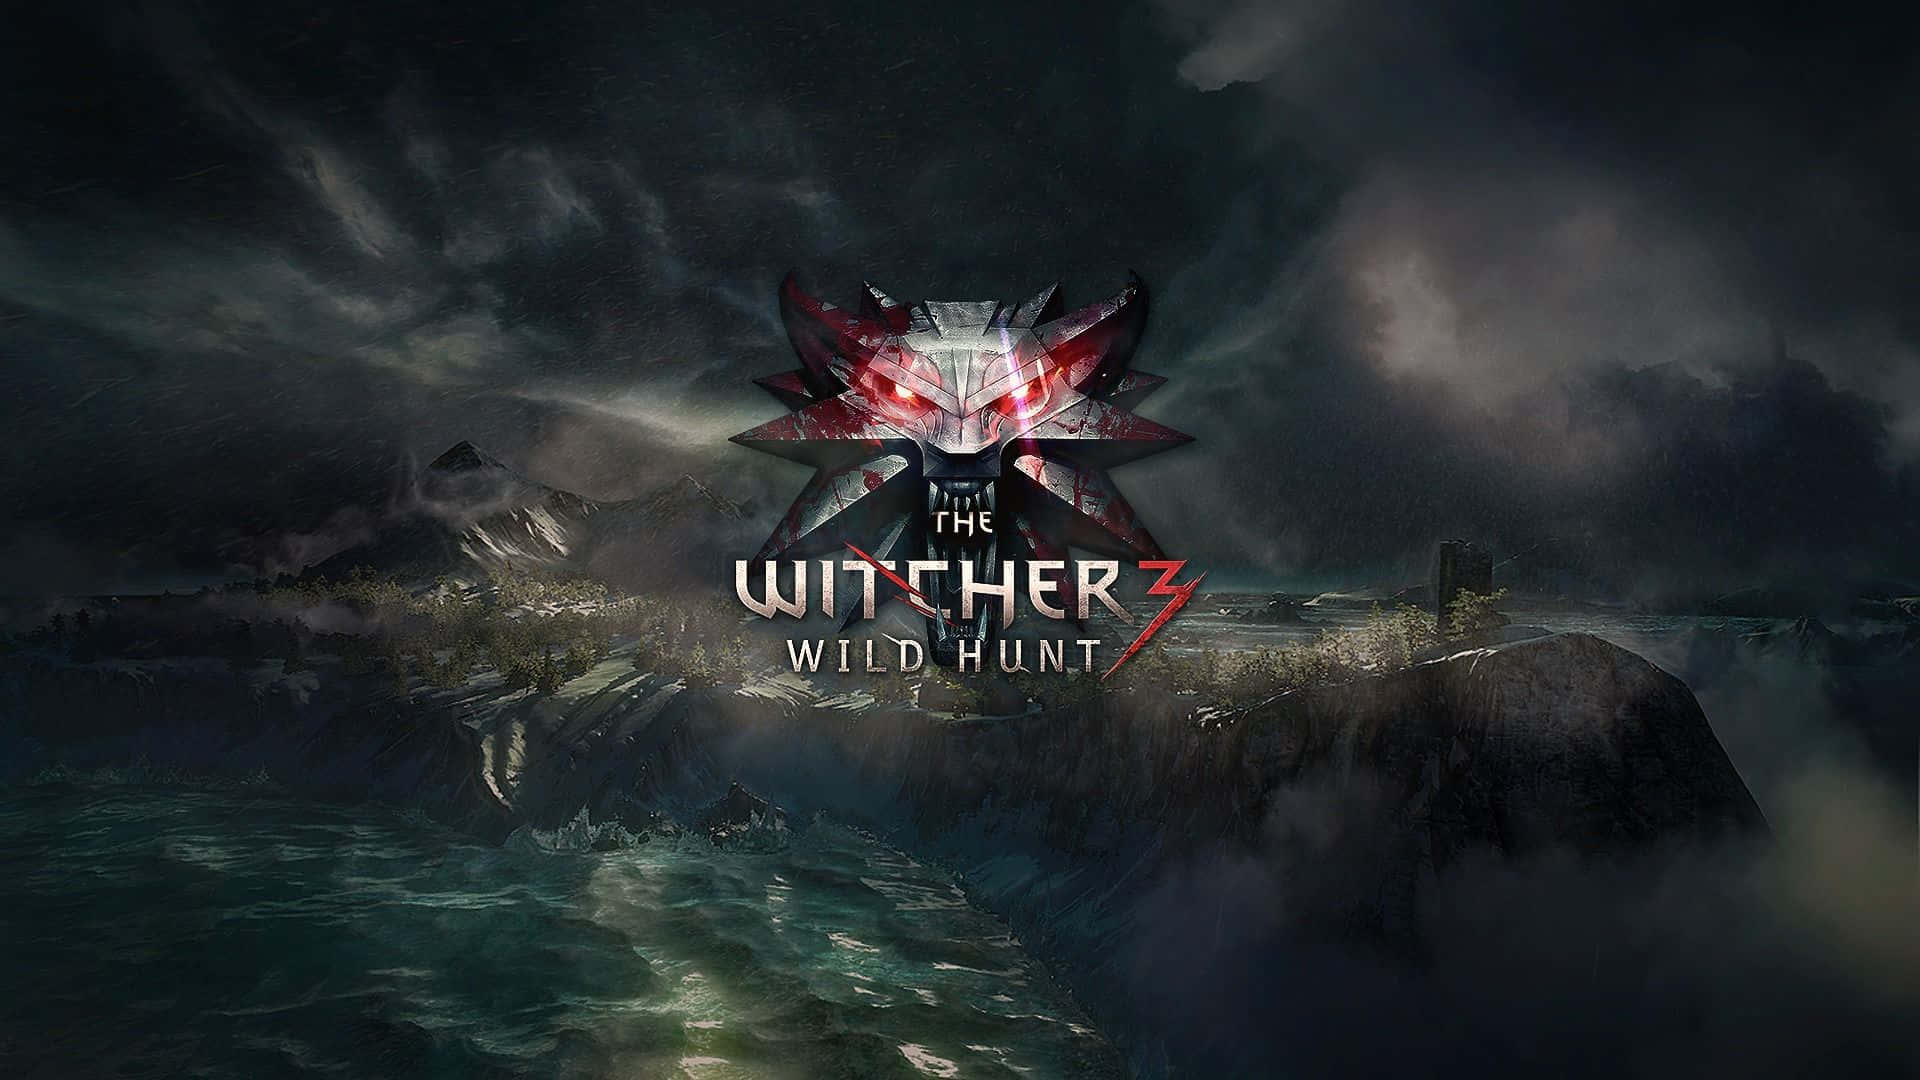 "Clash Swords and Cast Hexes in The Witcher 3" Wallpaper